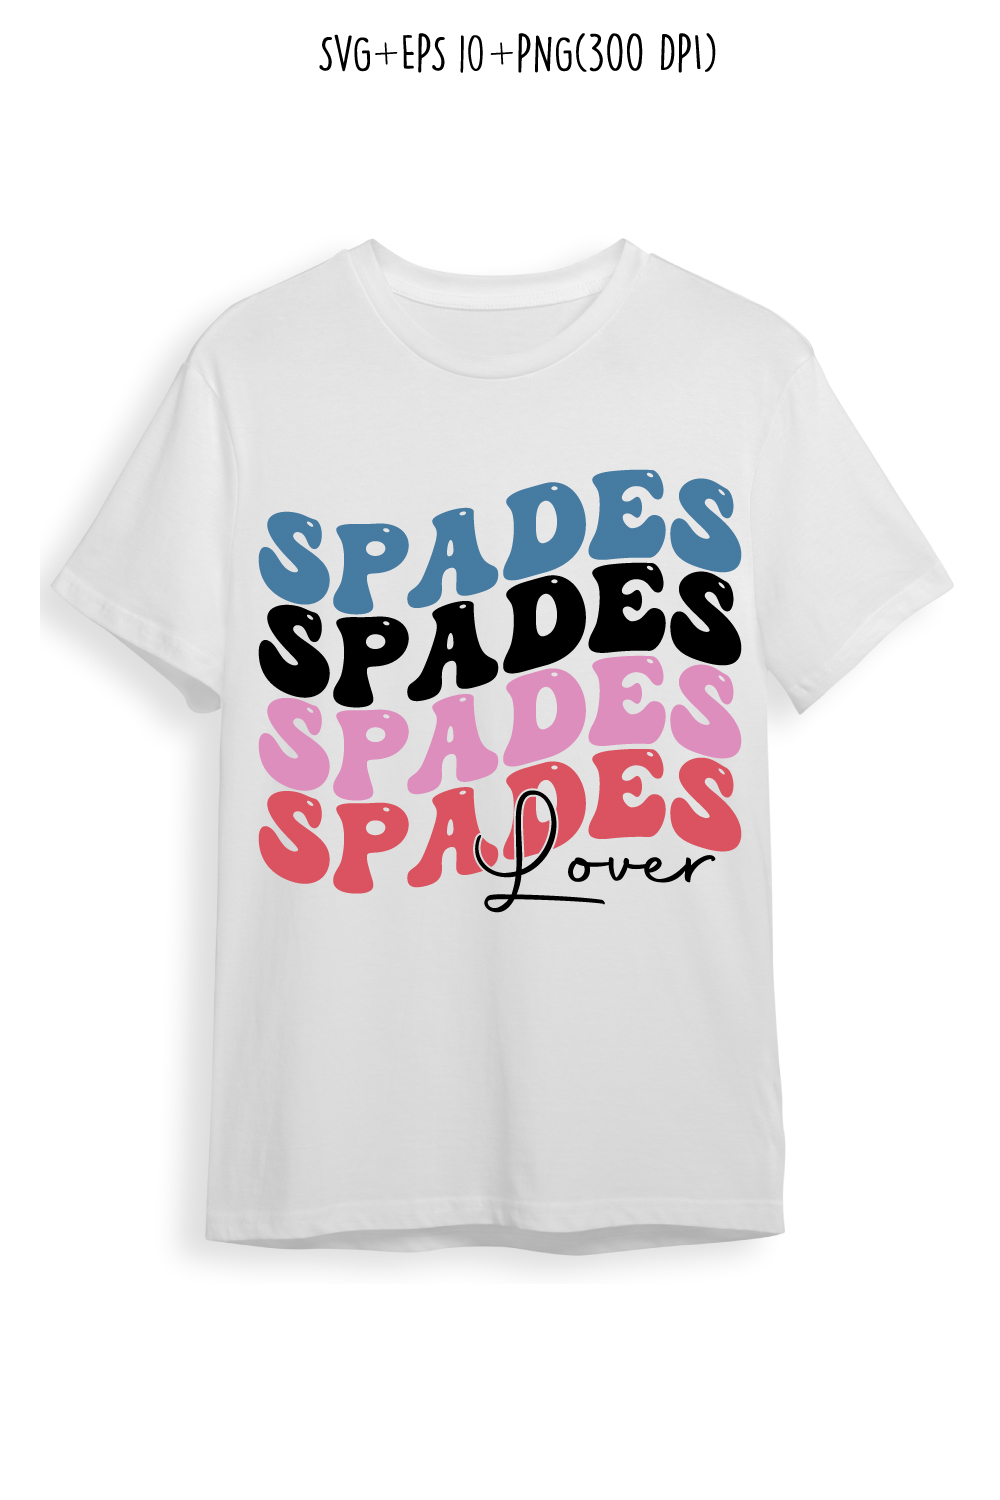 Spades lover indoor game retro typography design for t-shirts, cards, frame artwork, phone cases, bags, mugs, stickers, tumblers, print, etc pinterest preview image.